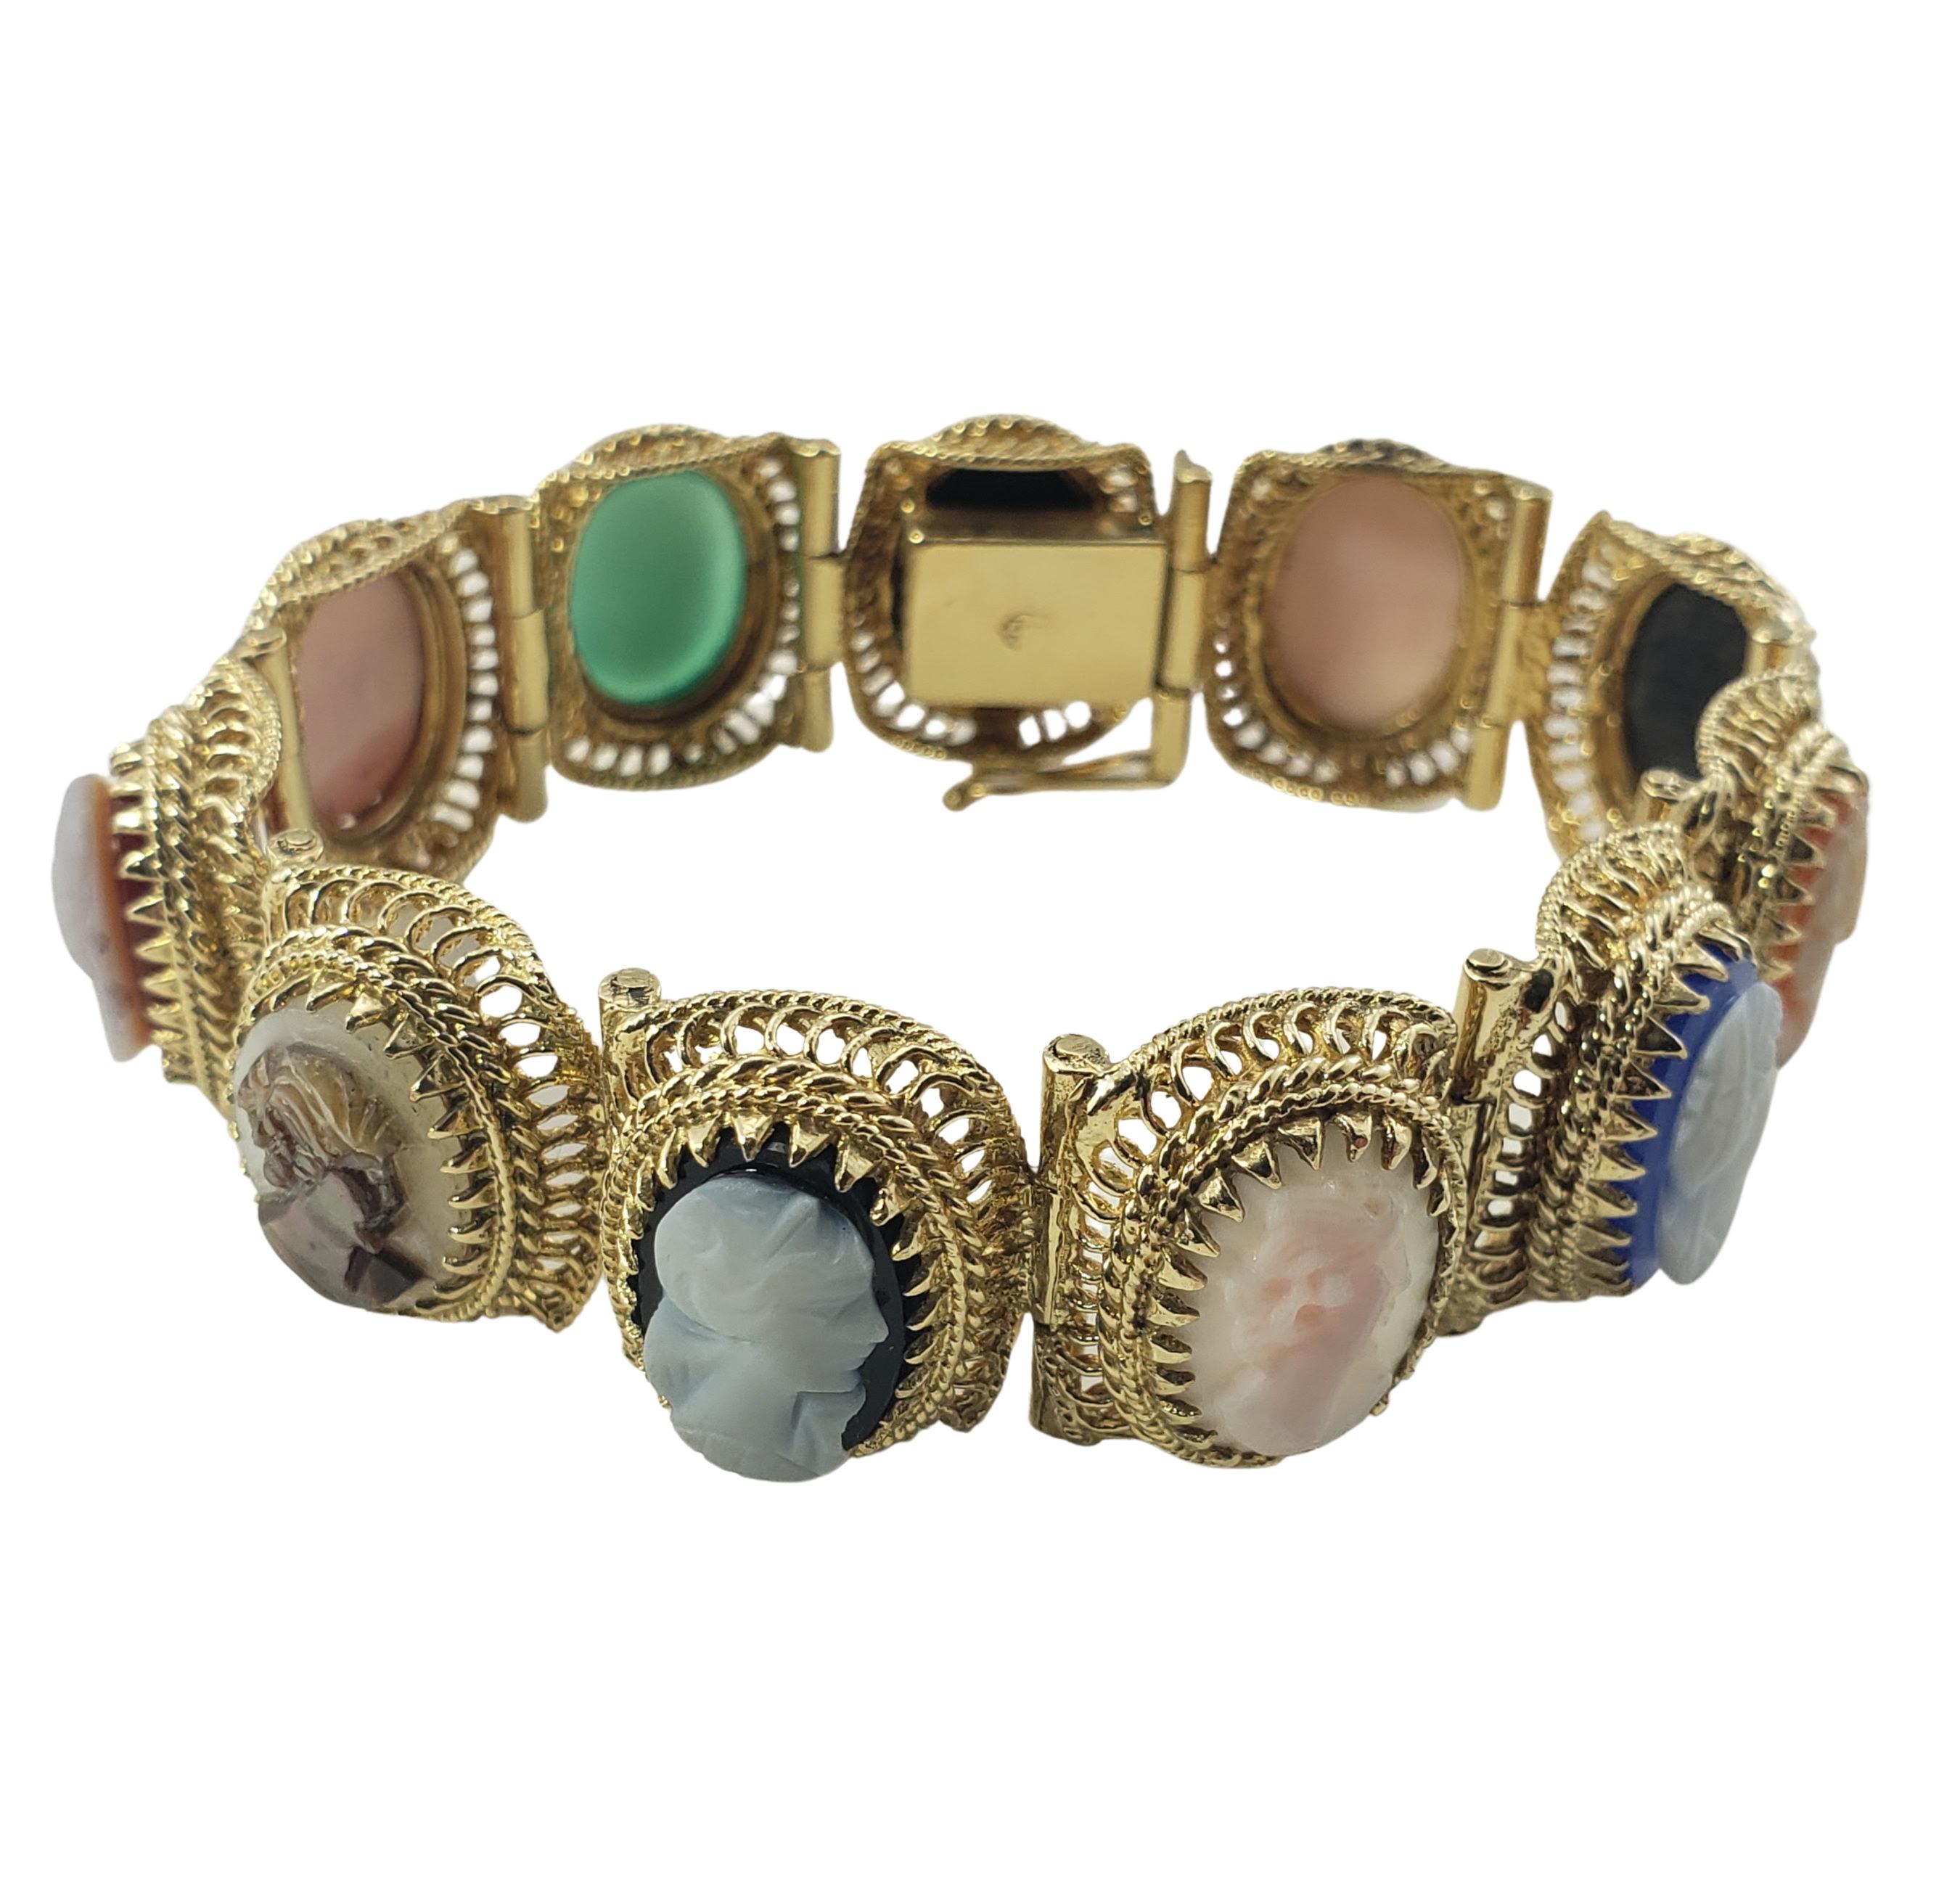 14 Karat Yellow Gold Cameo Bracelet-

This lovely bracelet features nine 11 multicolored cameos set in beautifully detailed 14K yellow gold.  Width:  17 mm.

Size:  6.25

Weight:  32.7 dwt. /  50.9 gr.

Tested for 14K gold.

Very good condition,